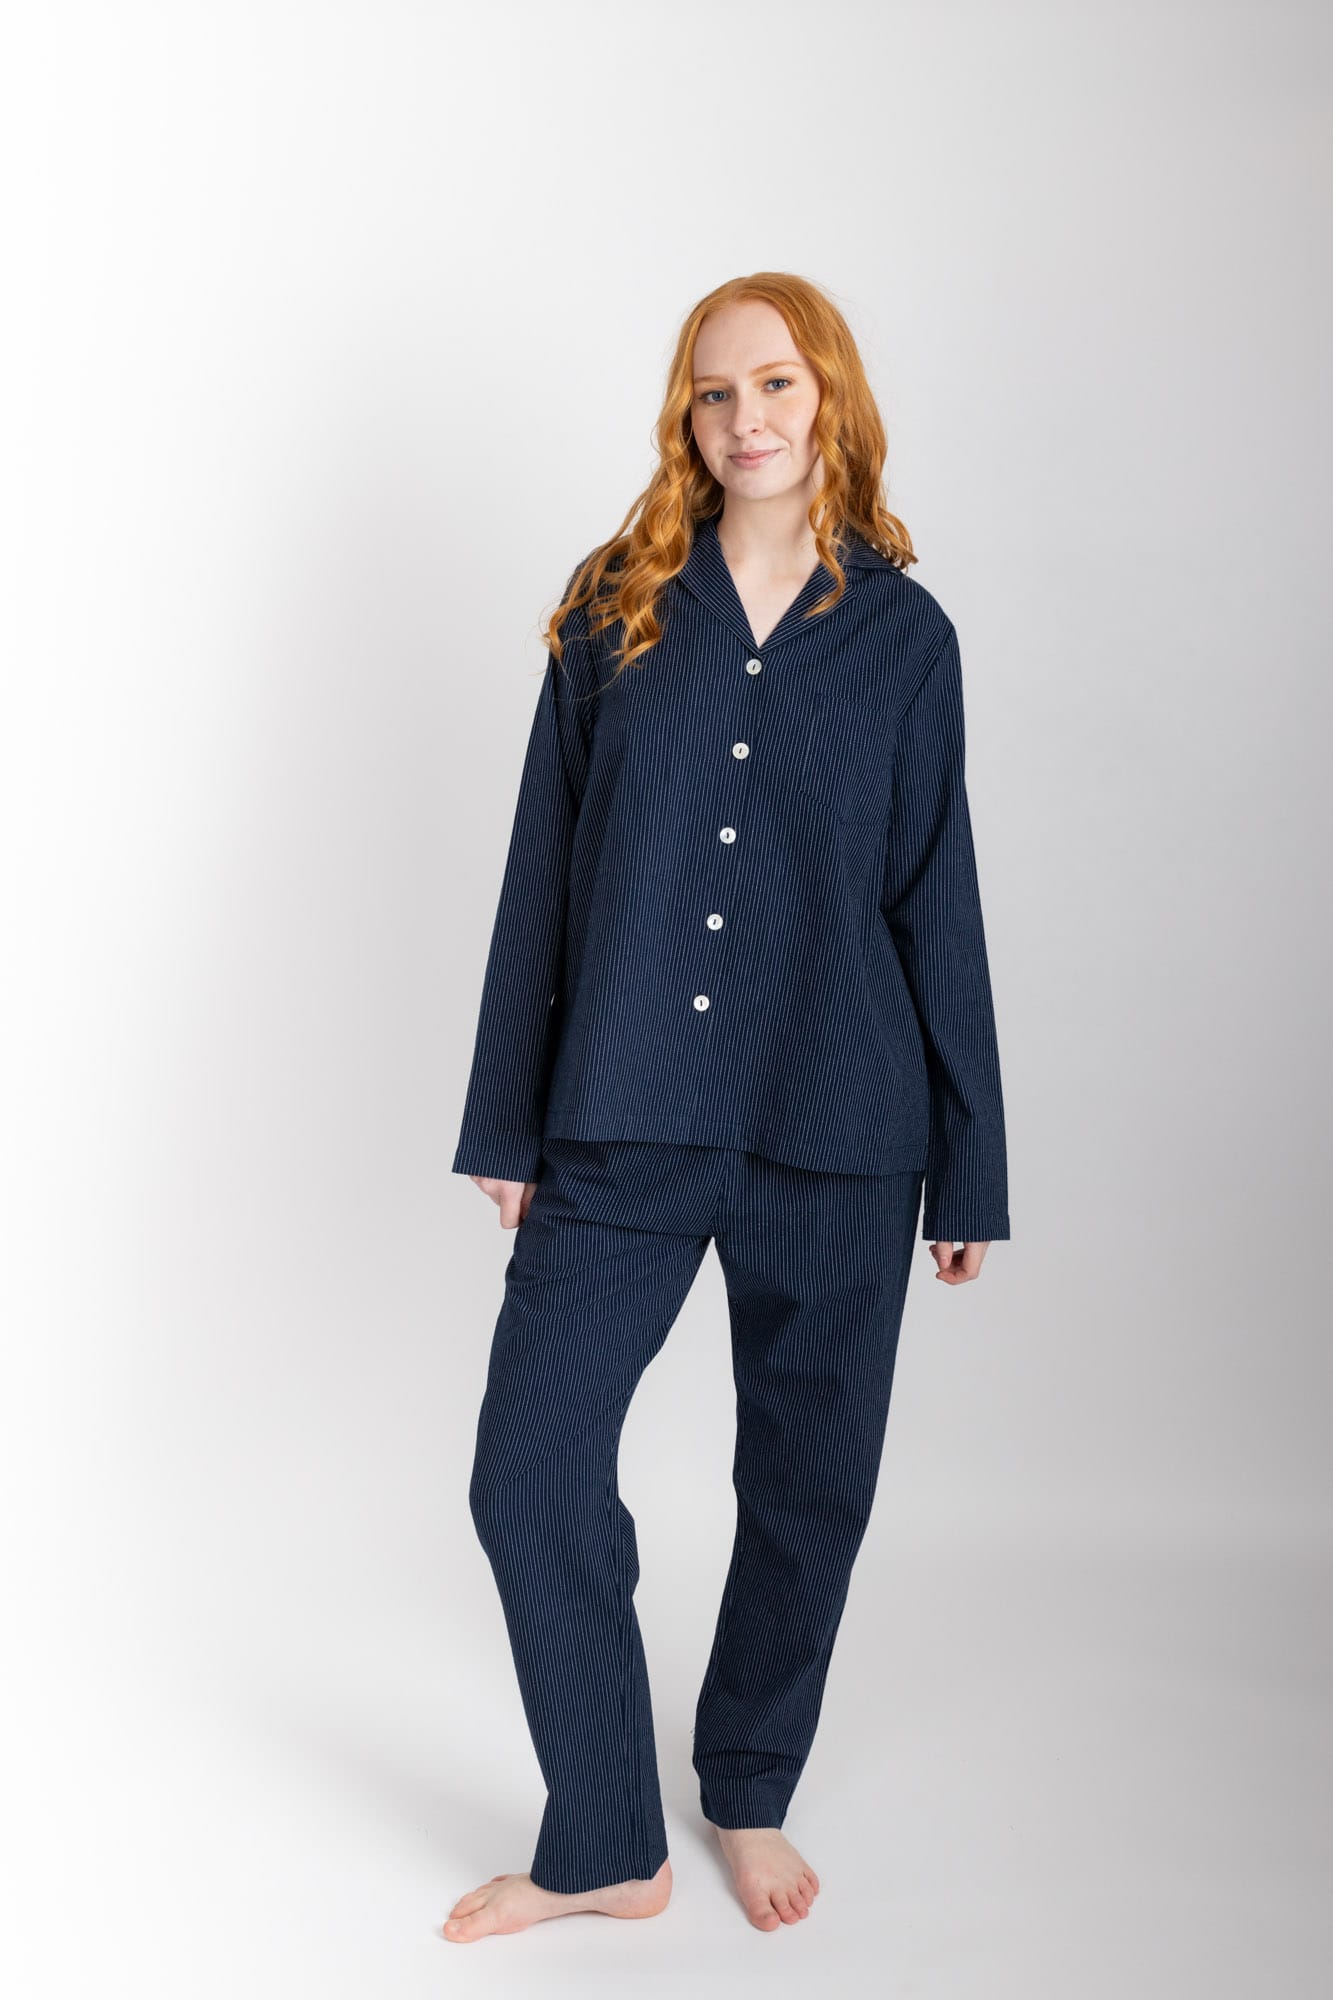 Women’s pyjama set including a long sleeve shirt and long sleeve pants. Made from organic cotton, in a Navy pinstripe.  The shirt has shell buttons, a front pocket and a back pleat.  The pants feature an elasticated waistband for comfort.